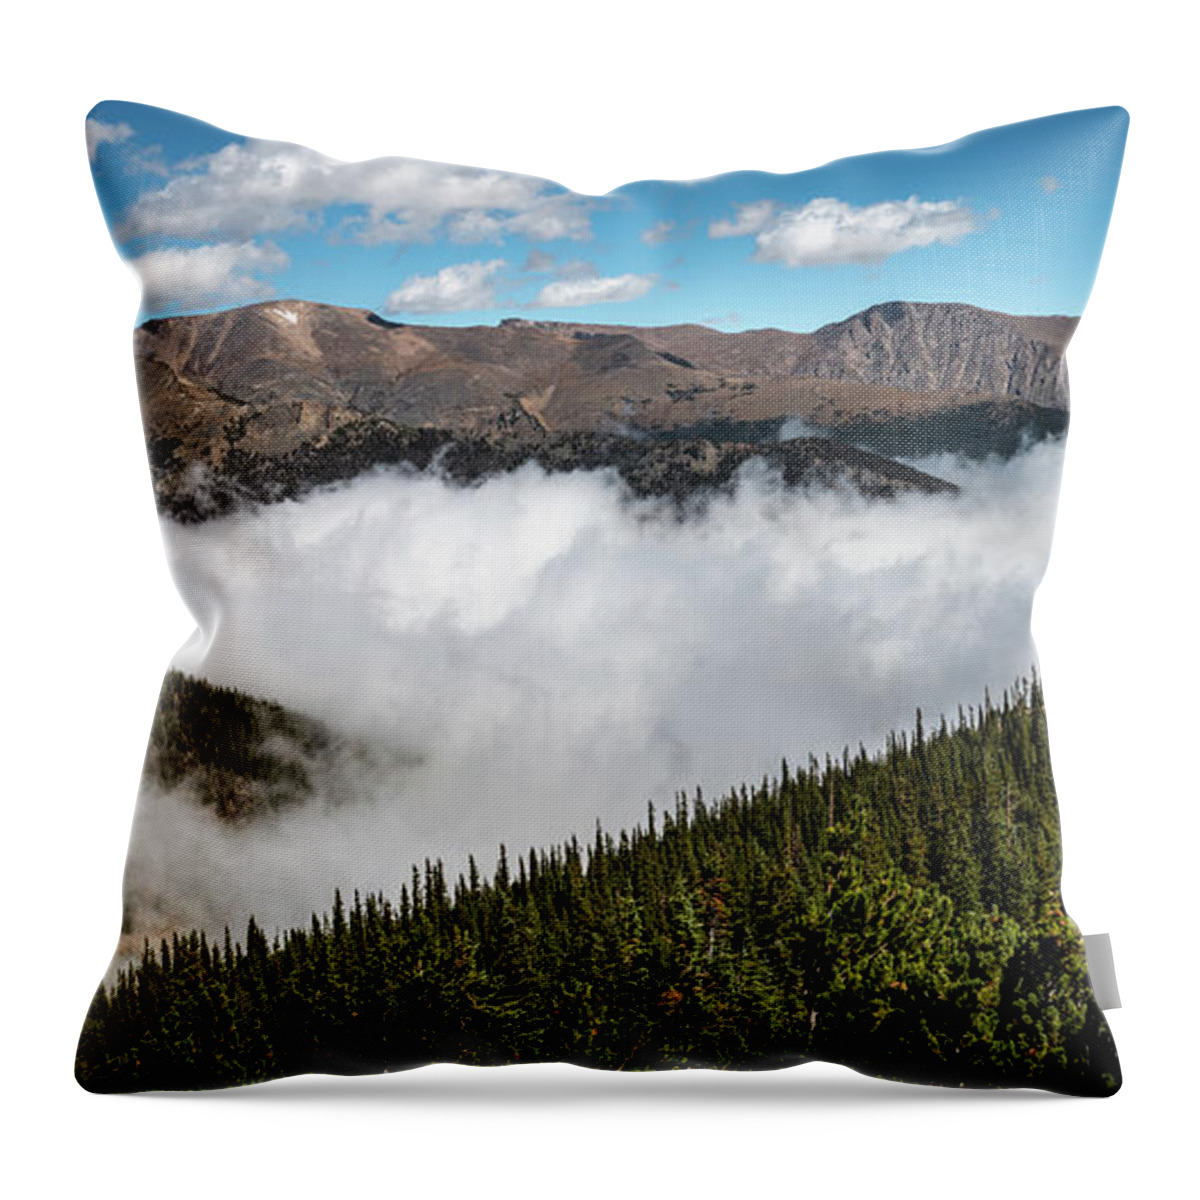 Above The Clouds Throw Pillow featuring the photograph Above The Clouds by George Buxbaum